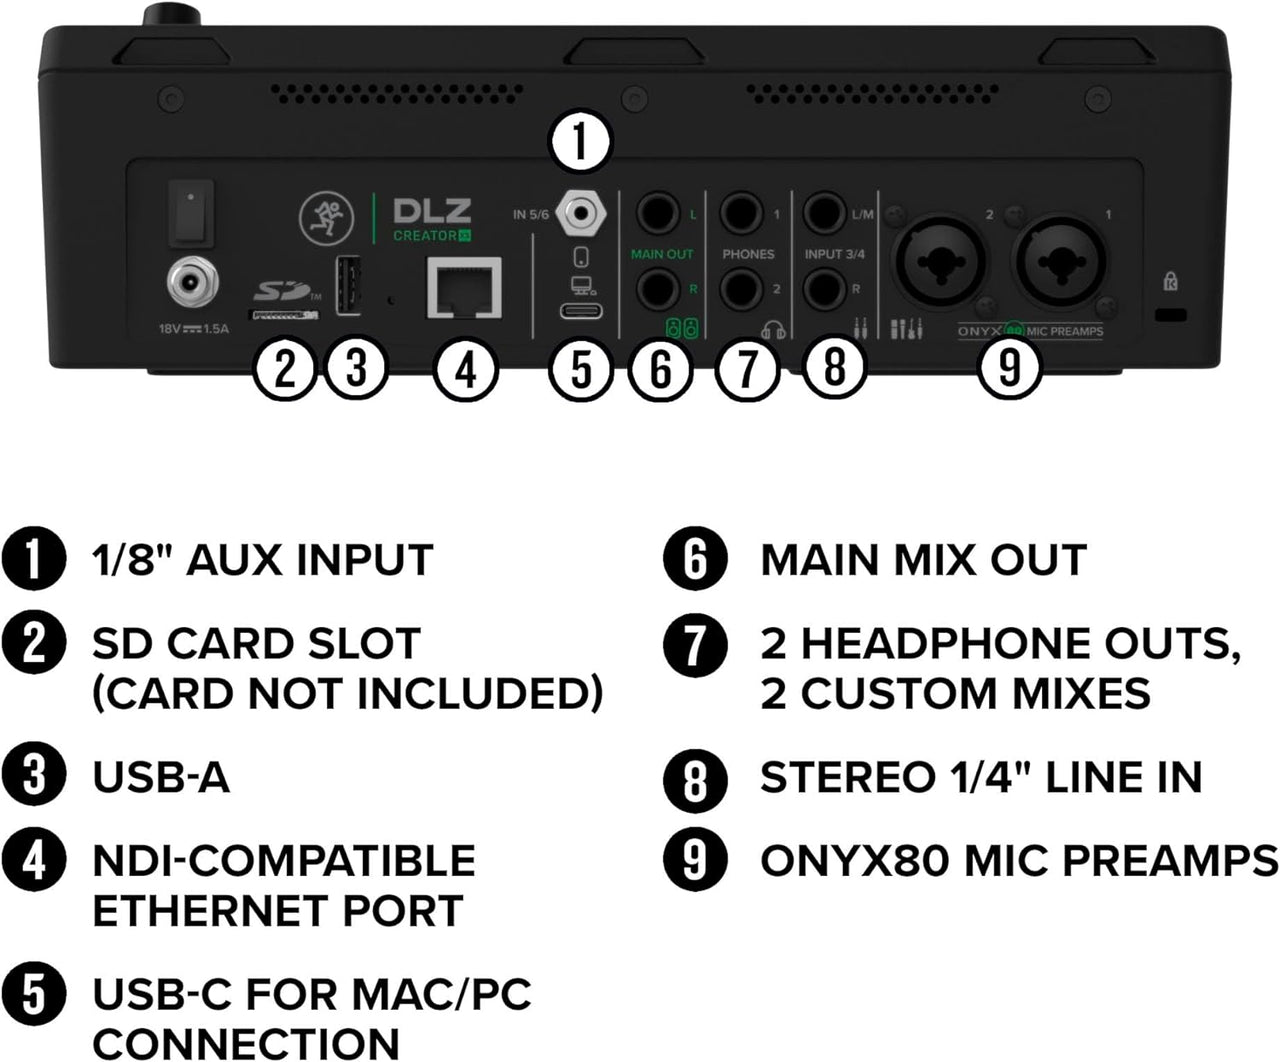 Mackie DLZ Creator Adaptive Digital Mixer for Podcasting, Streaming and YouTube with User Modes & Professional Over-Ear Monitoring Headphones,Black